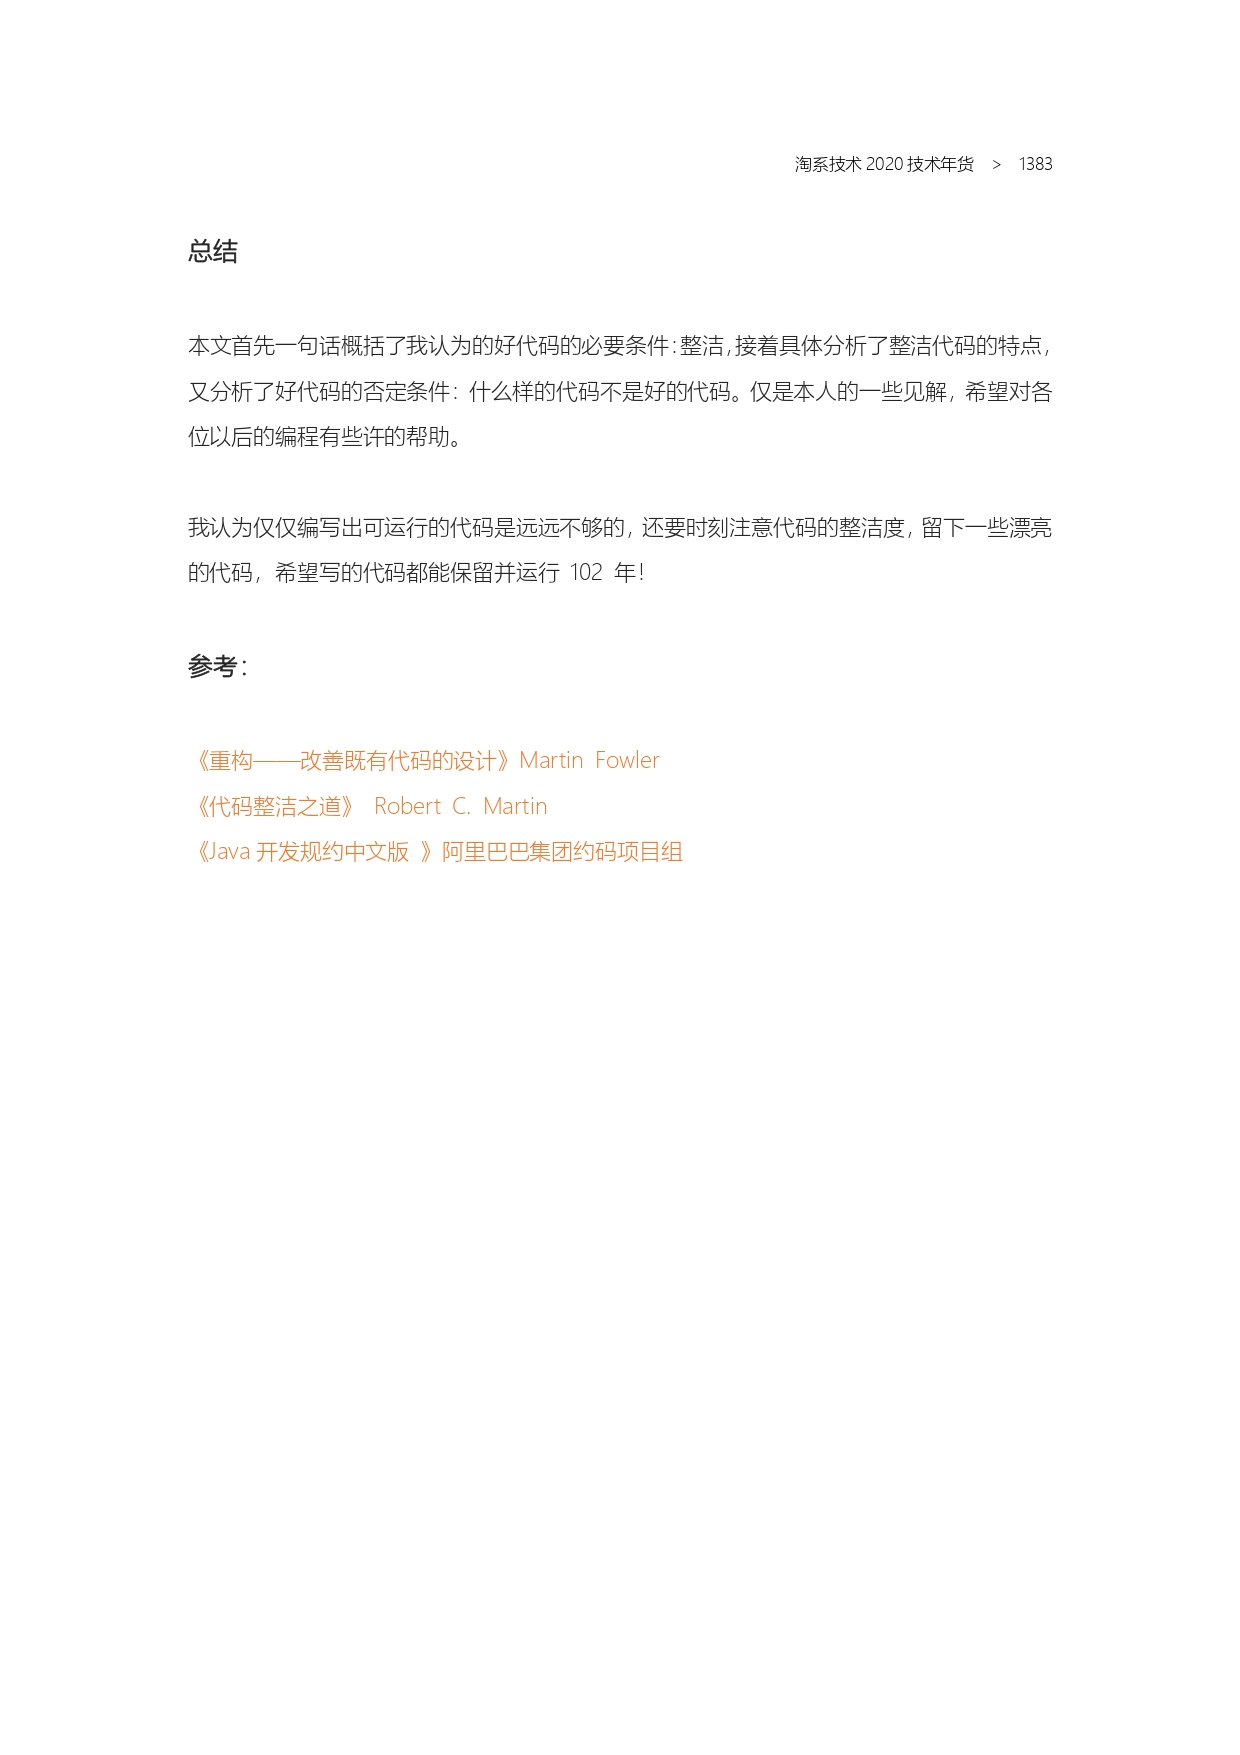 The Complete Works of Tao Technology 2020-1313-1671-1-195_page-0071.jpg